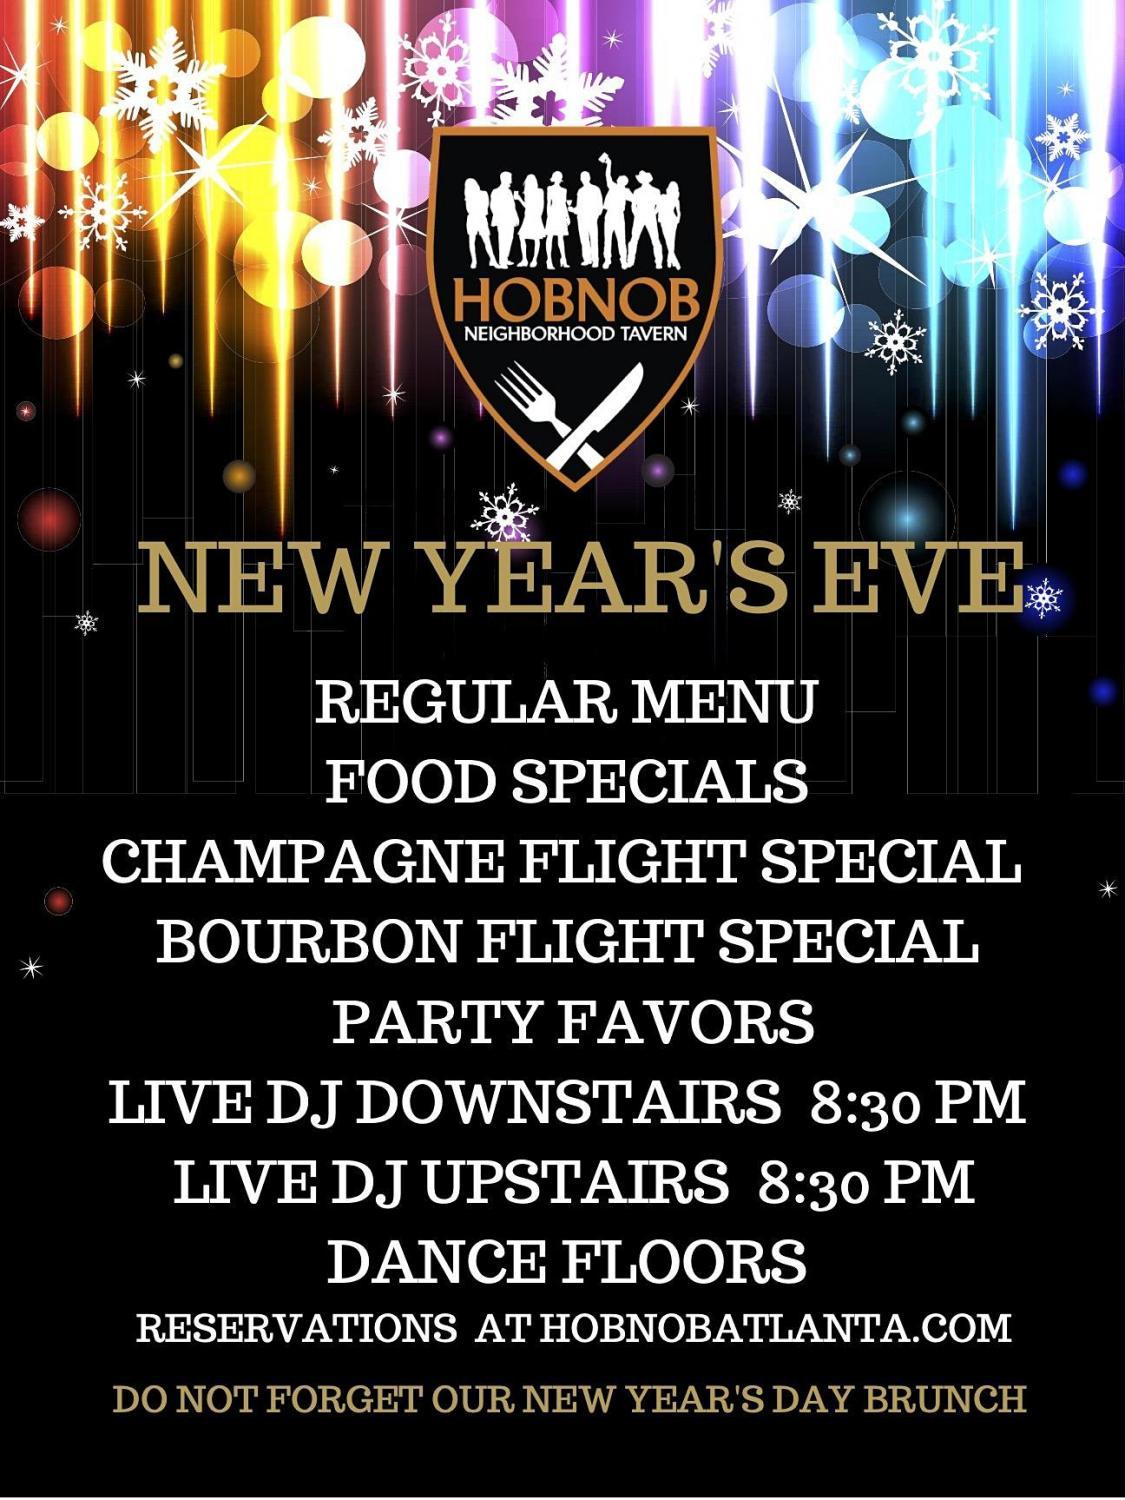 NEW YEAR'S EVE PARTY AT ATLANTIC STATION HOBNOB